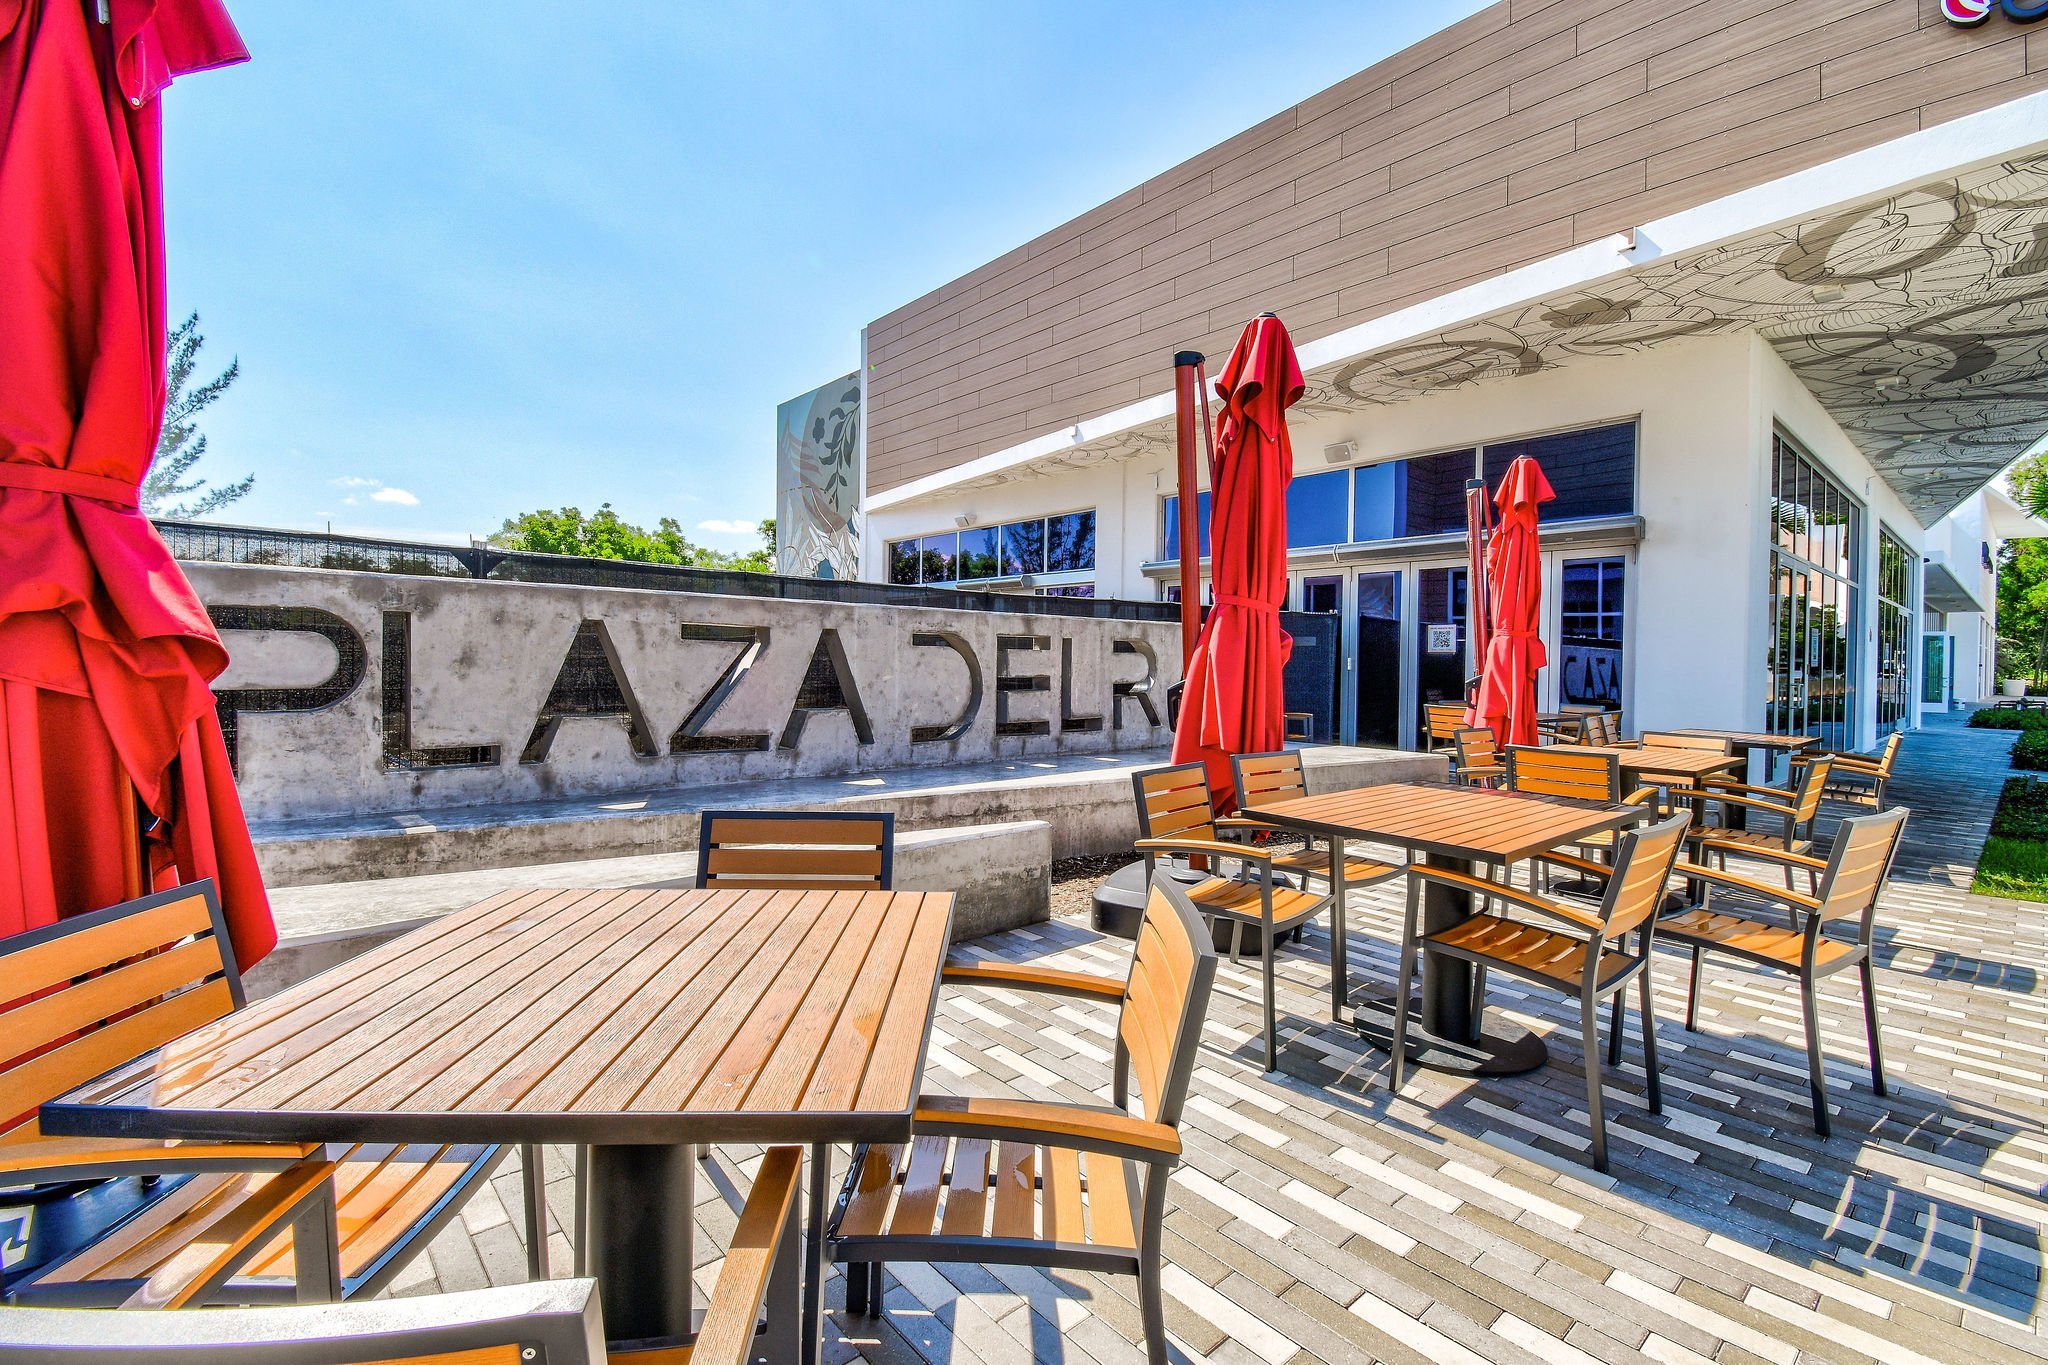 &lt;strong&gt;PLAZA DELRAY&lt;/strong&gt;&lt;a&gt;SEE PROJECT →&lt;/a&gt;